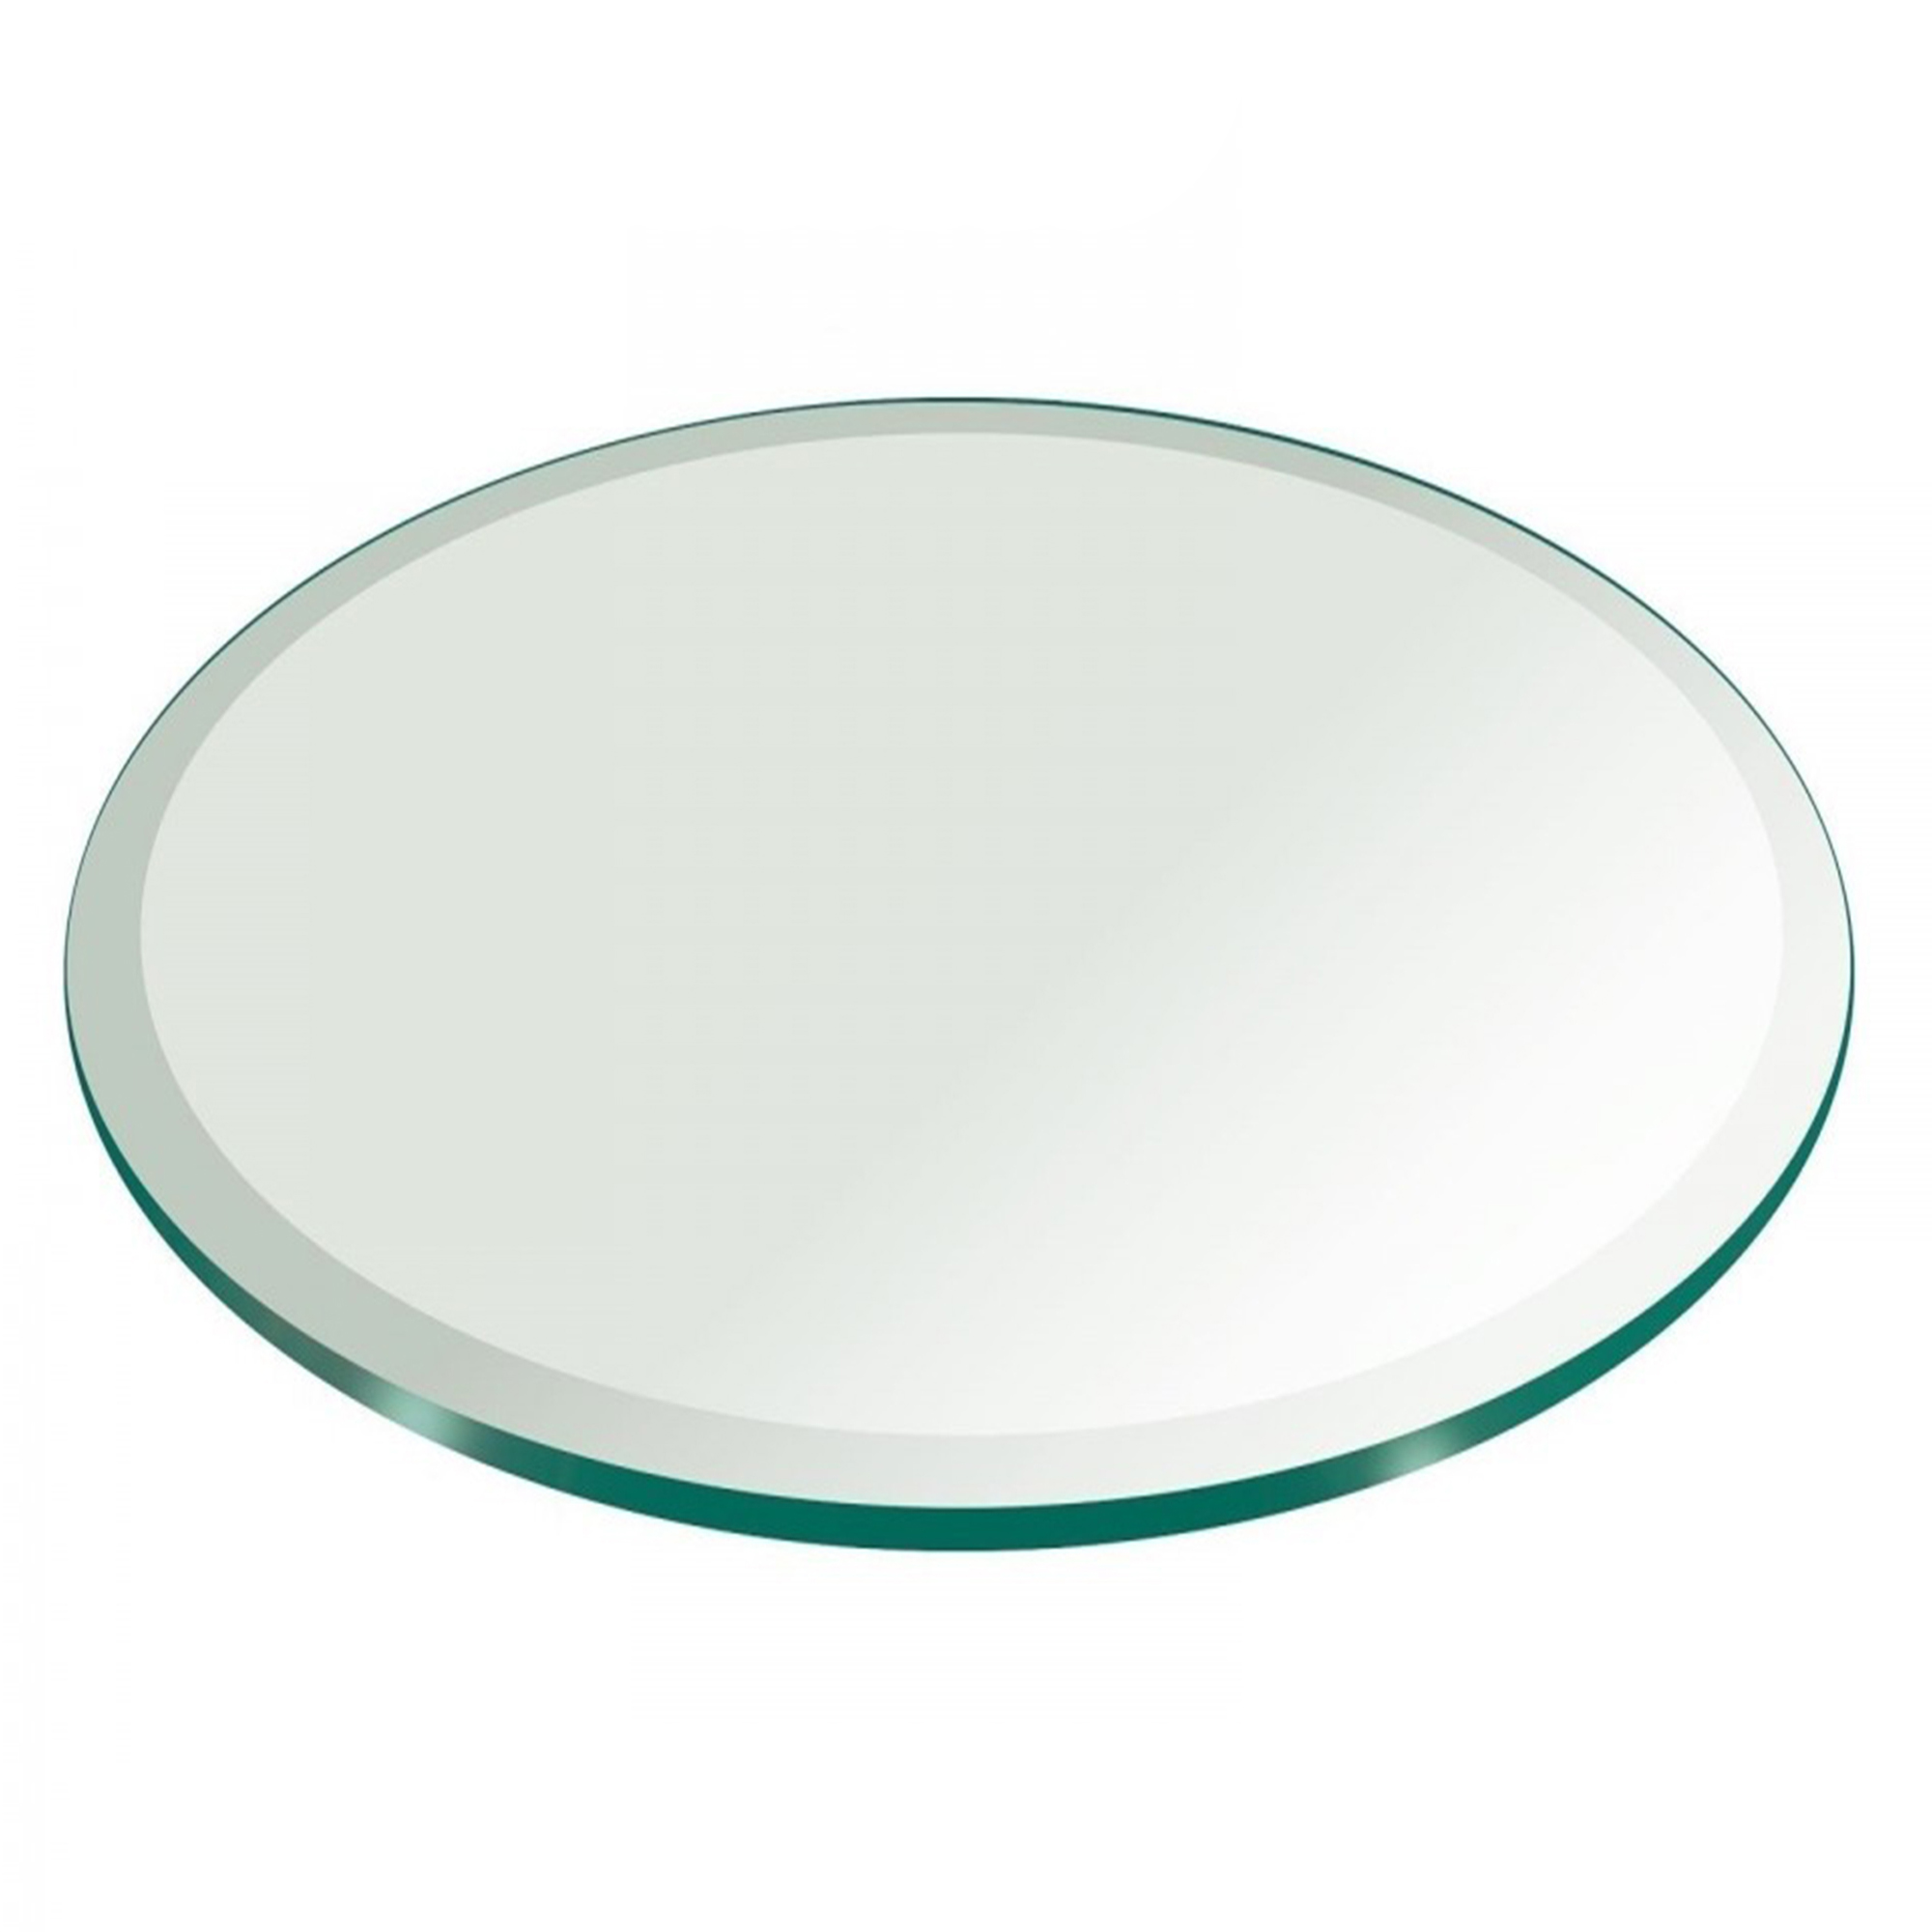 Round Glass Dining Table Tops, Second Hand Round Table Tops